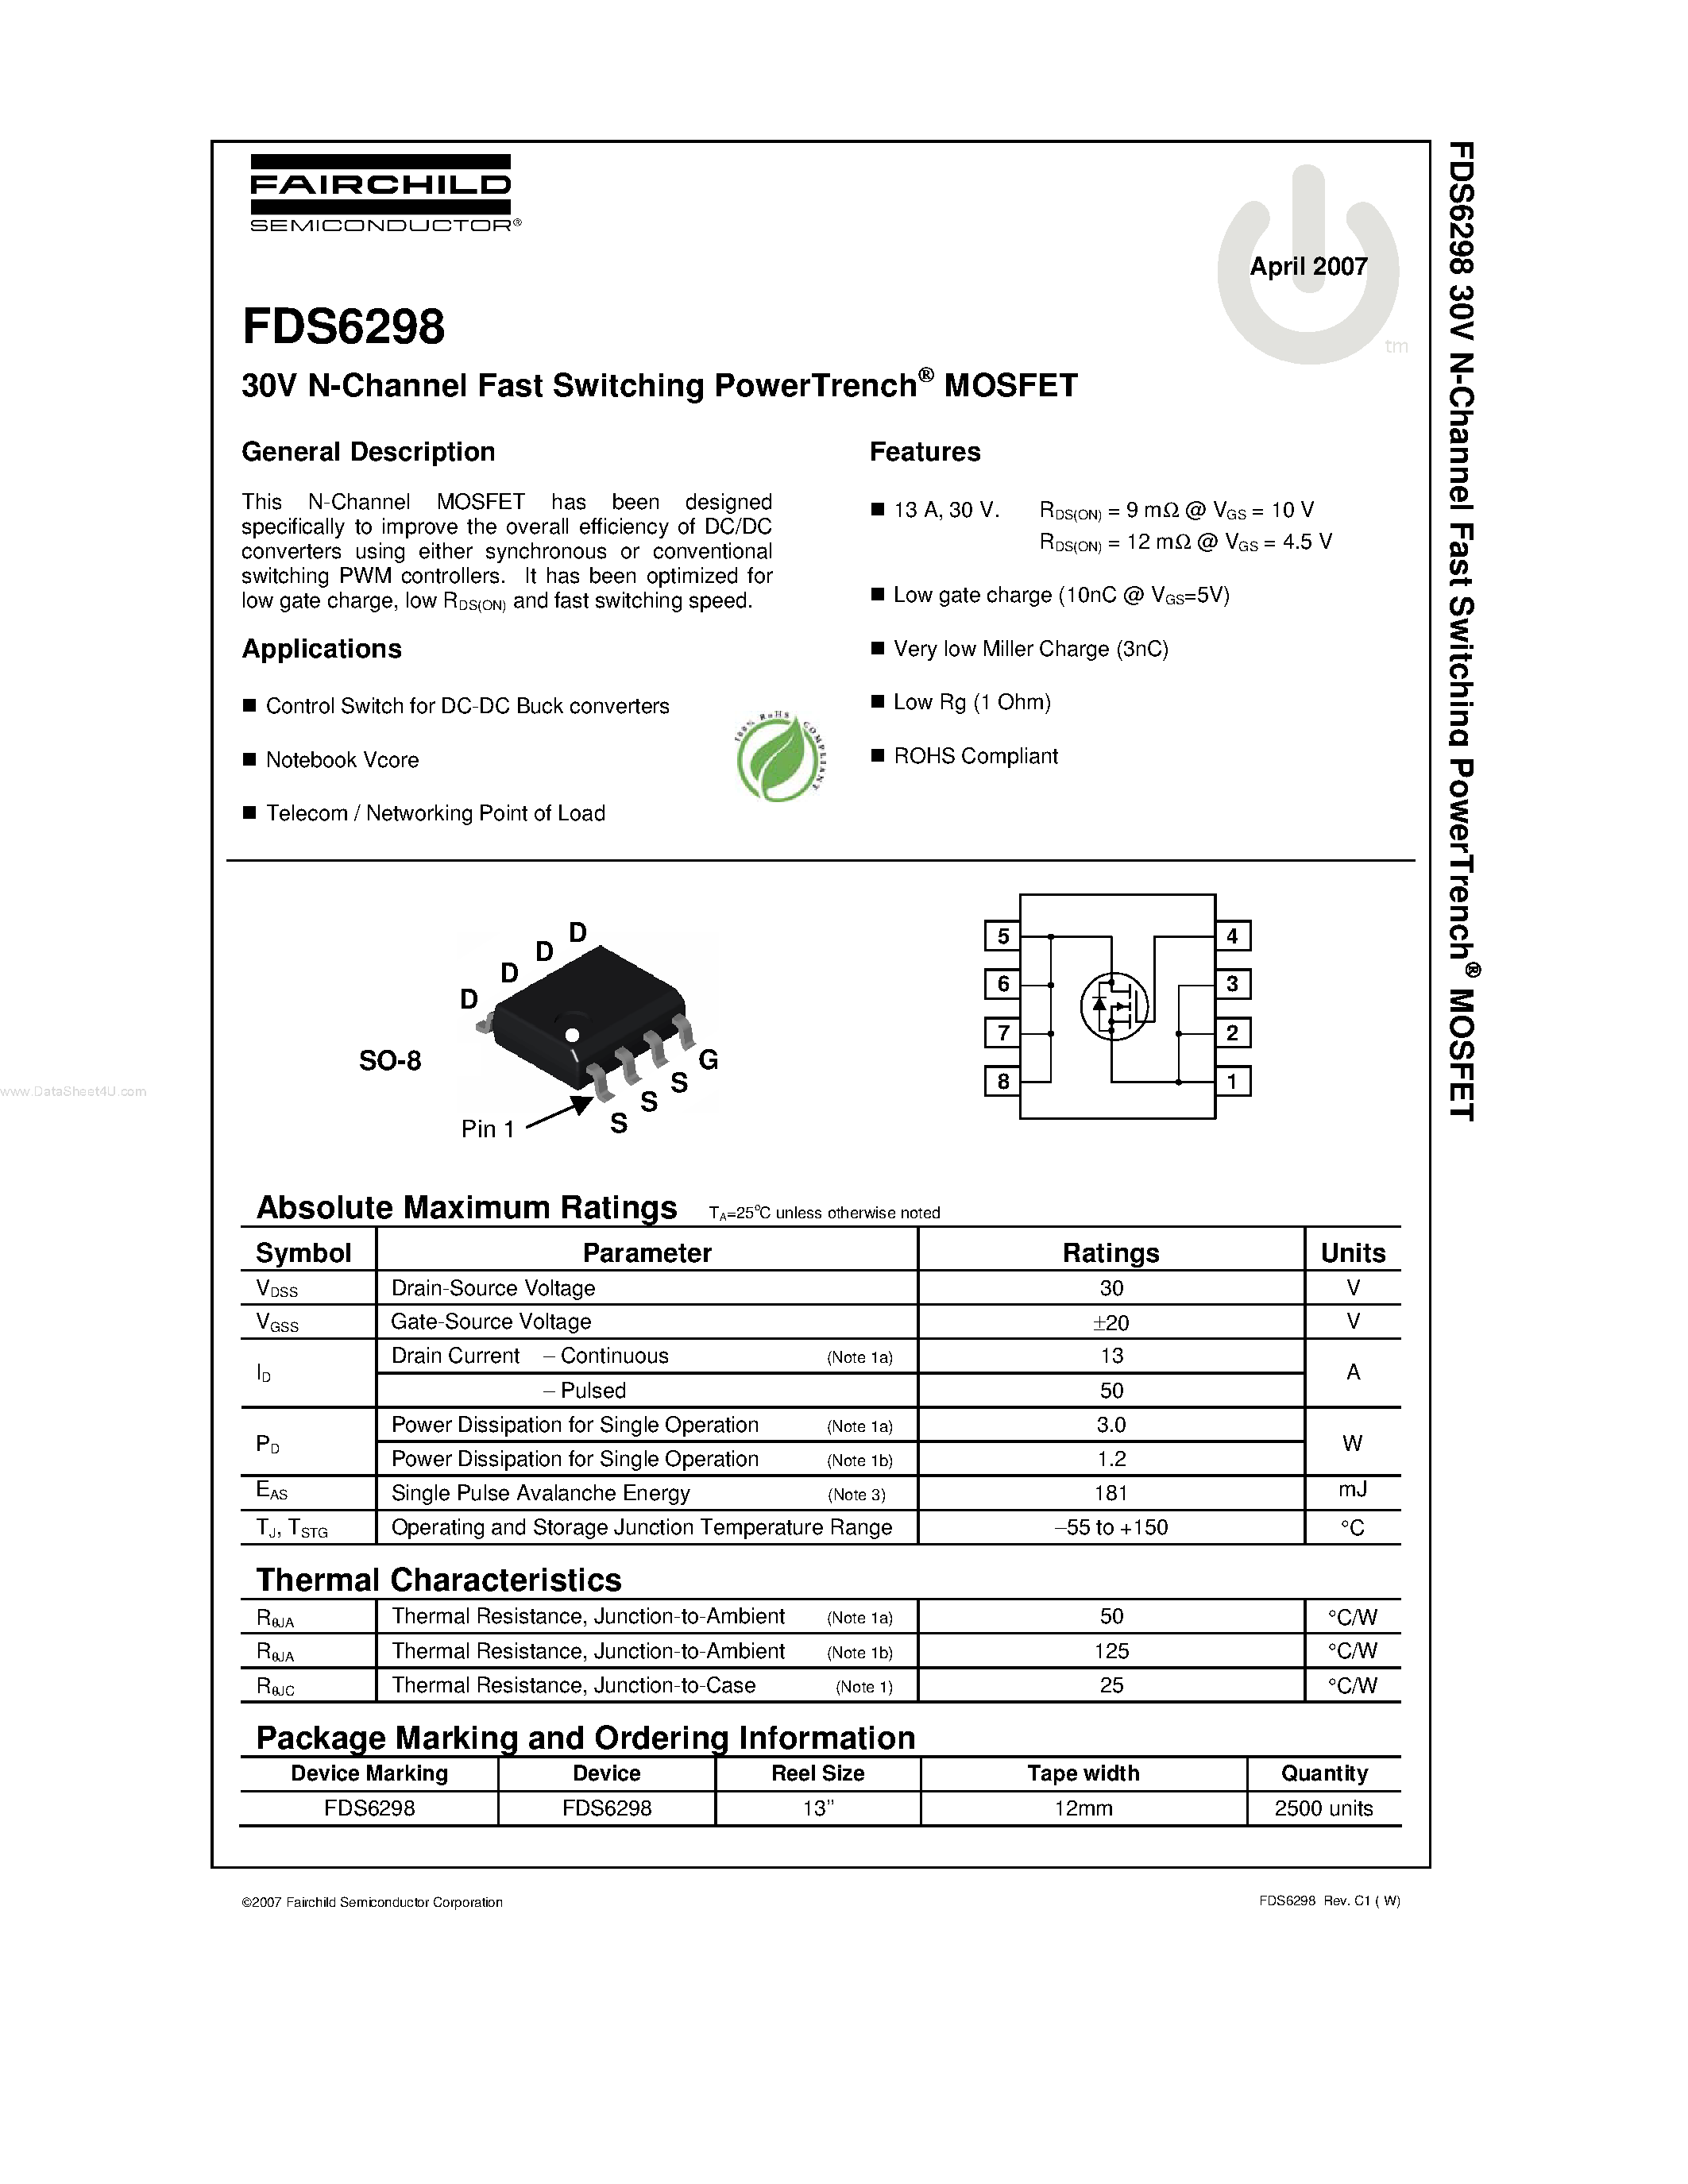 Datasheet FDS6298 - 30V N-Channel Fast Switching PowerTrench MOSFET page 1